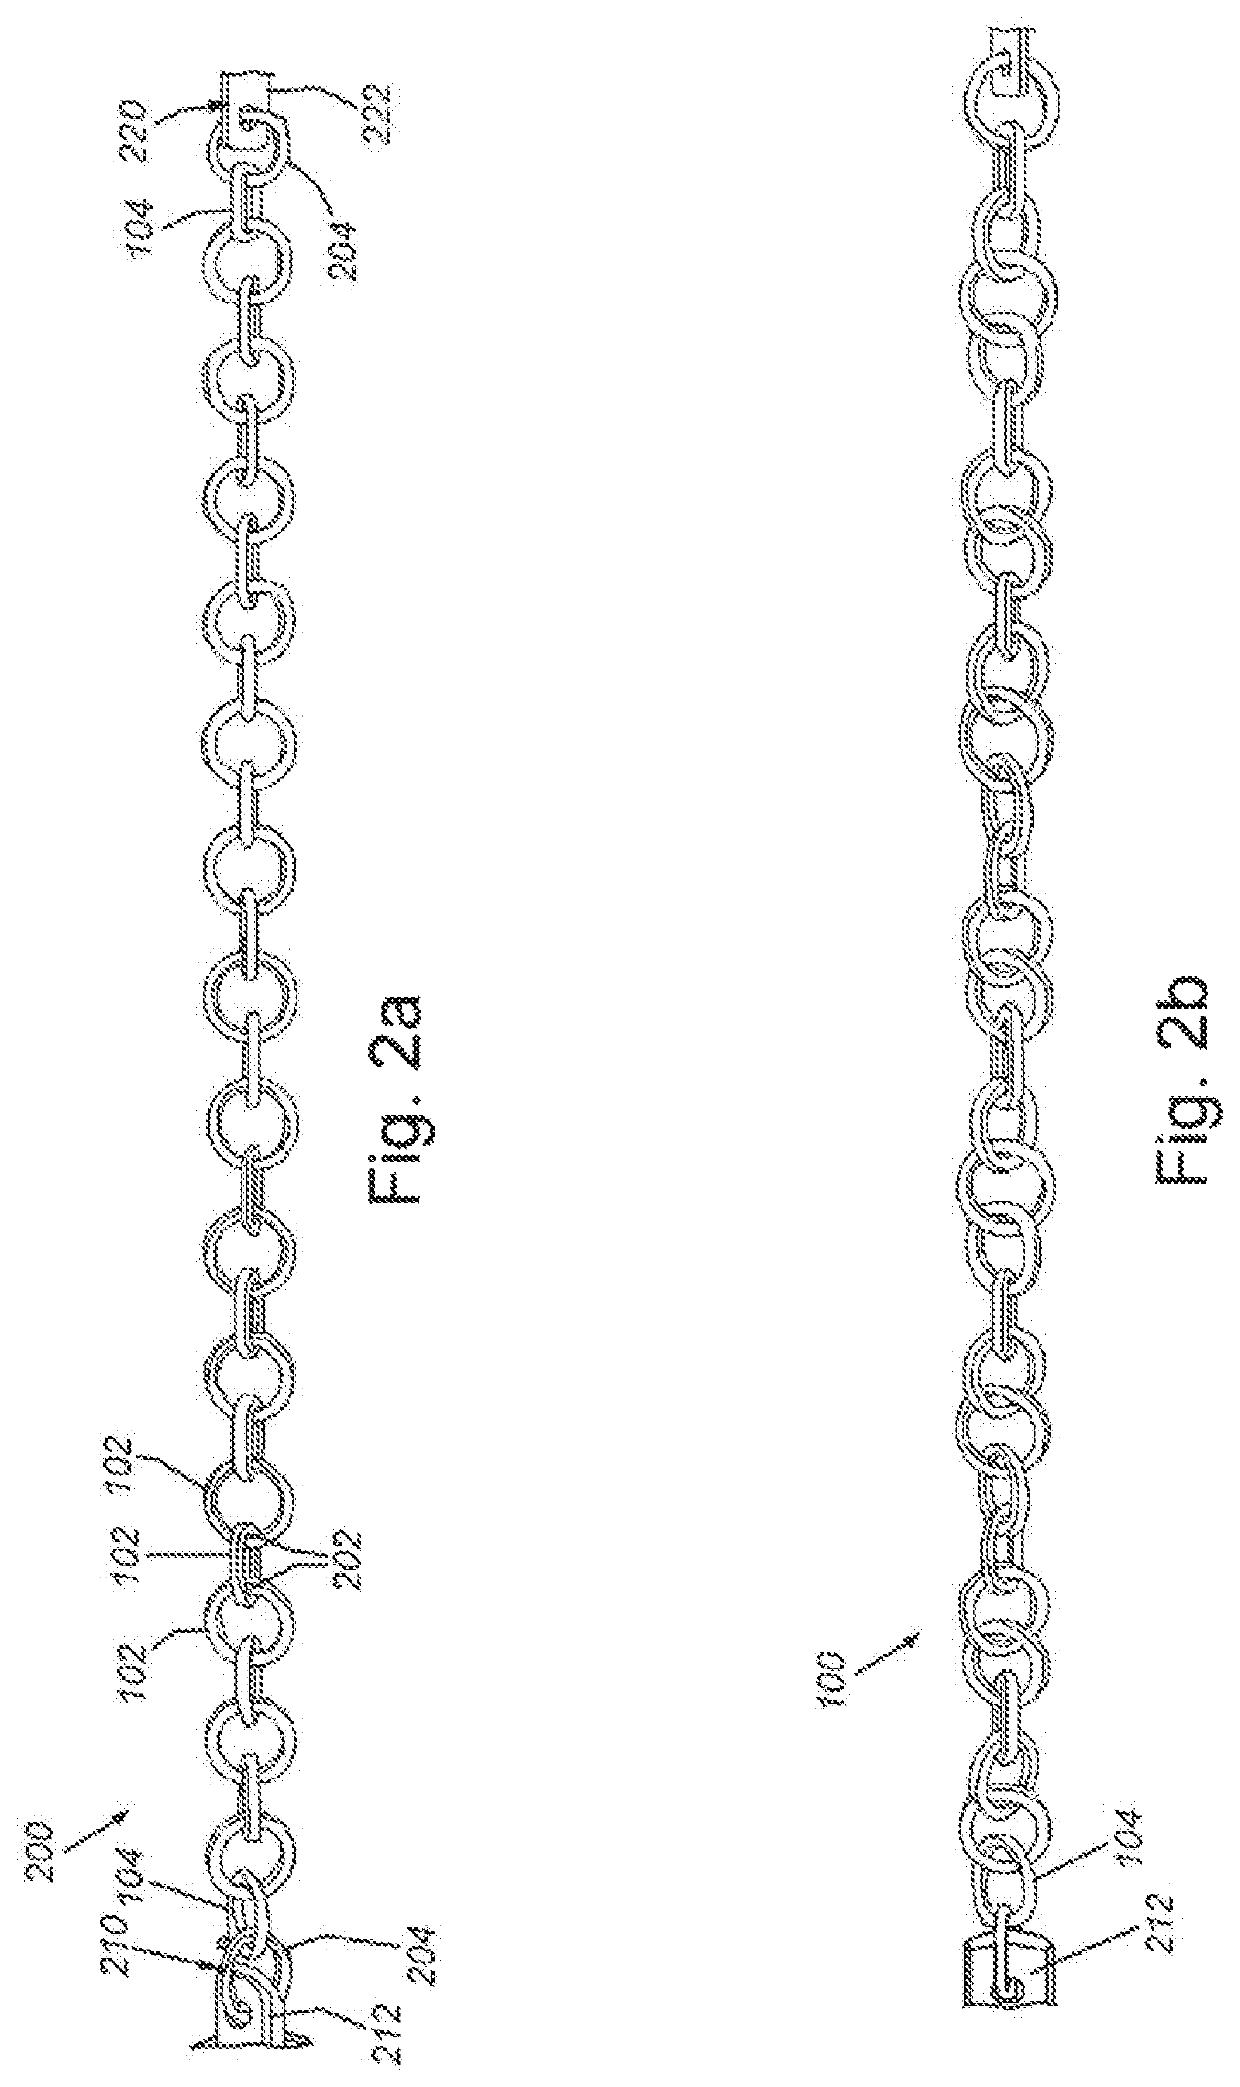 System and method for conversion of rotational motion into linear actuation by mechanical stacking or unstacking of connected links